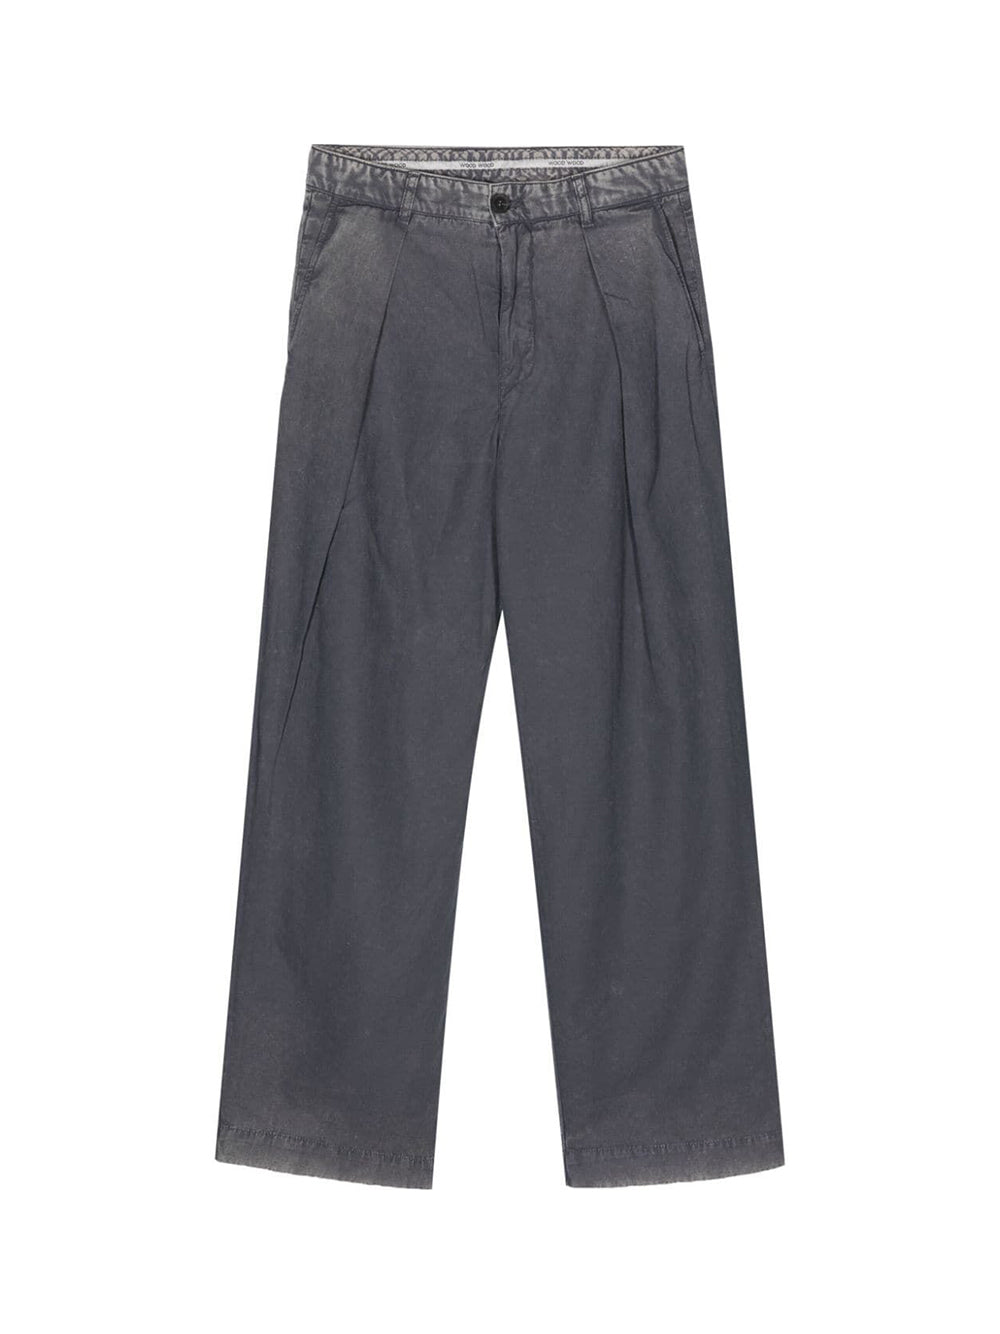 Fraser Pleated Chino trouser